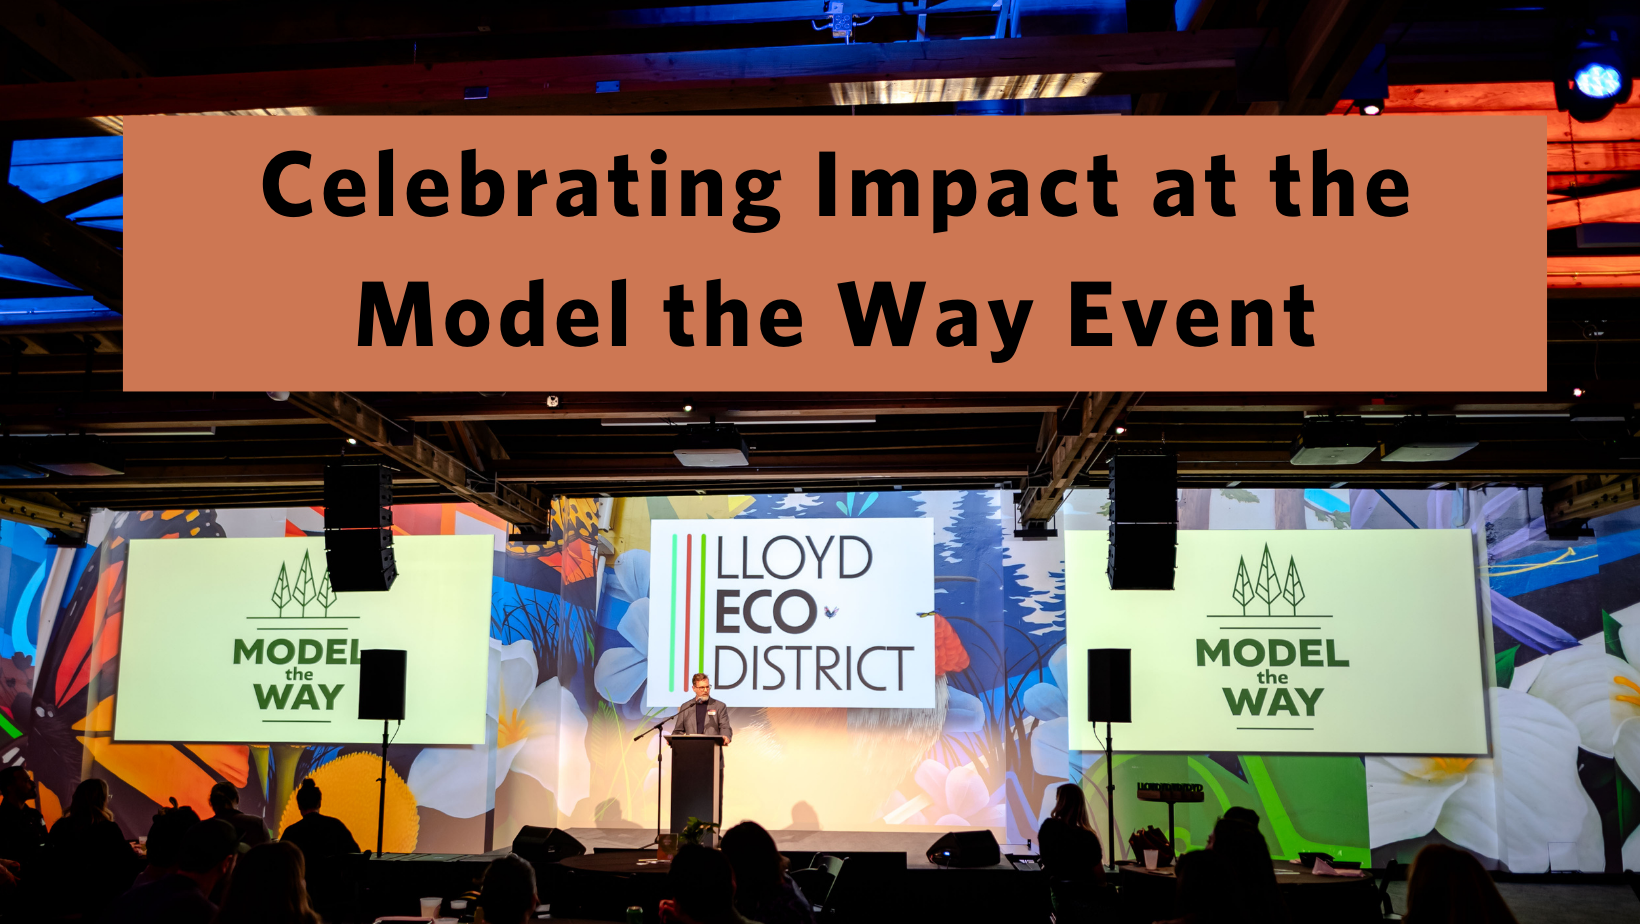 Image of the stage at Model the Way with a man speaking at the podium and the words “Celebrating Impact at the Model the Way Event”